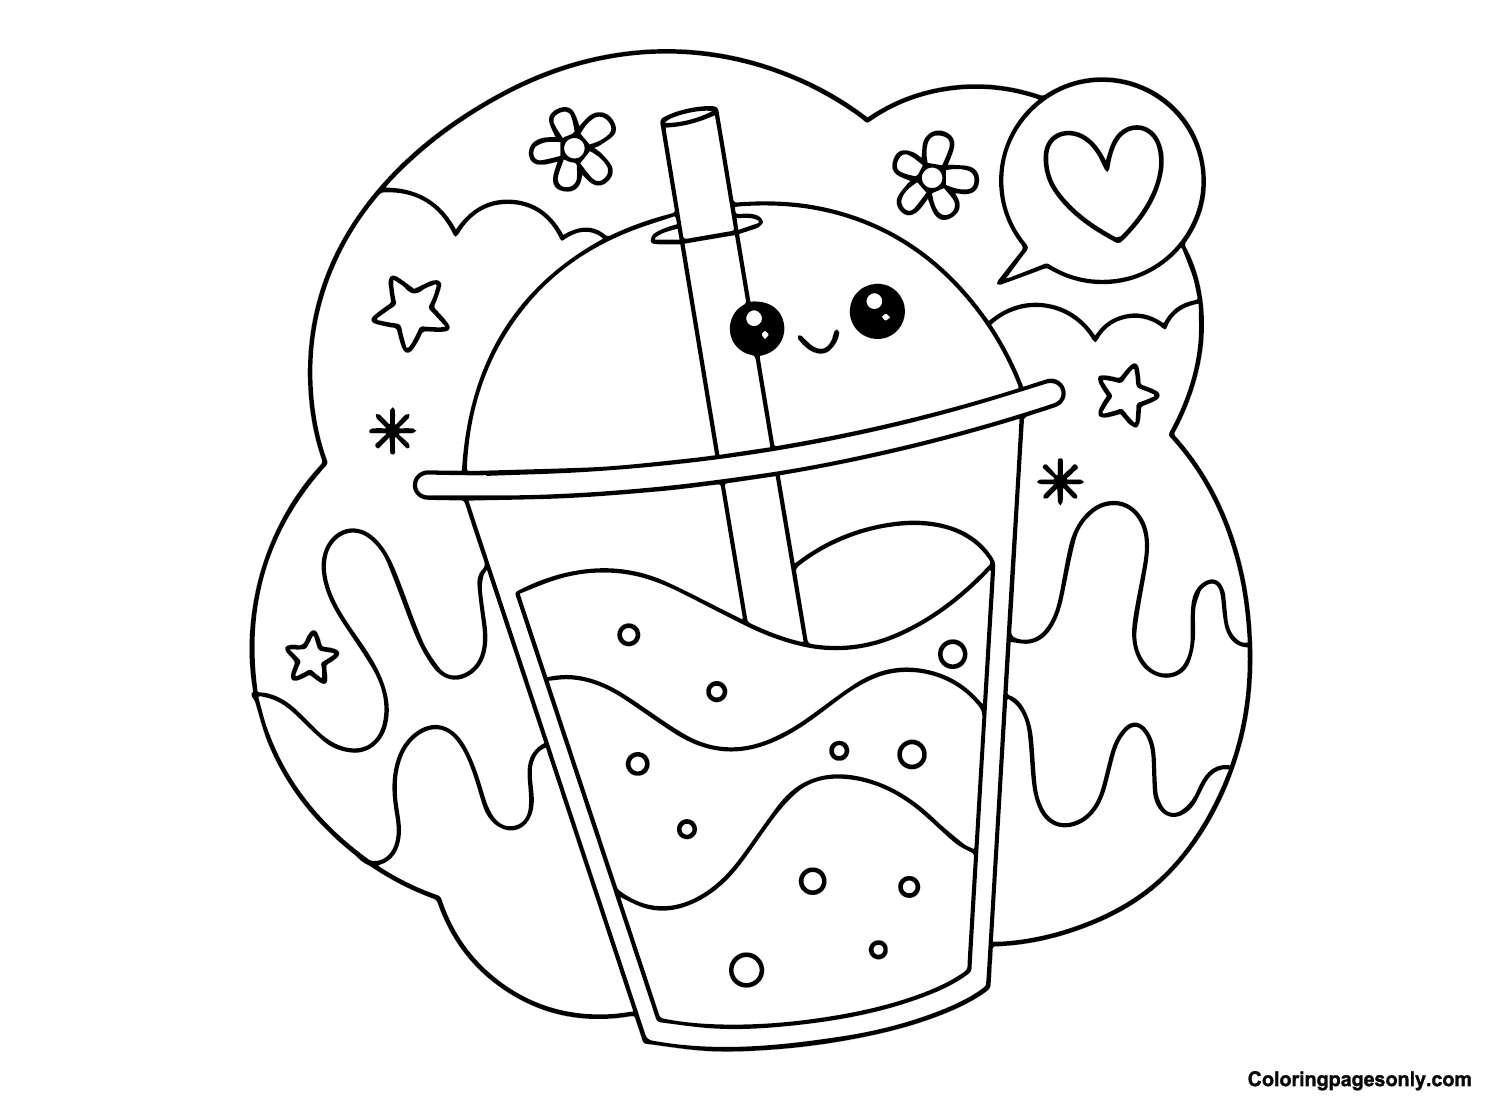 Boba Tea Coloring Pages Coloring Pages For Kids And Adults